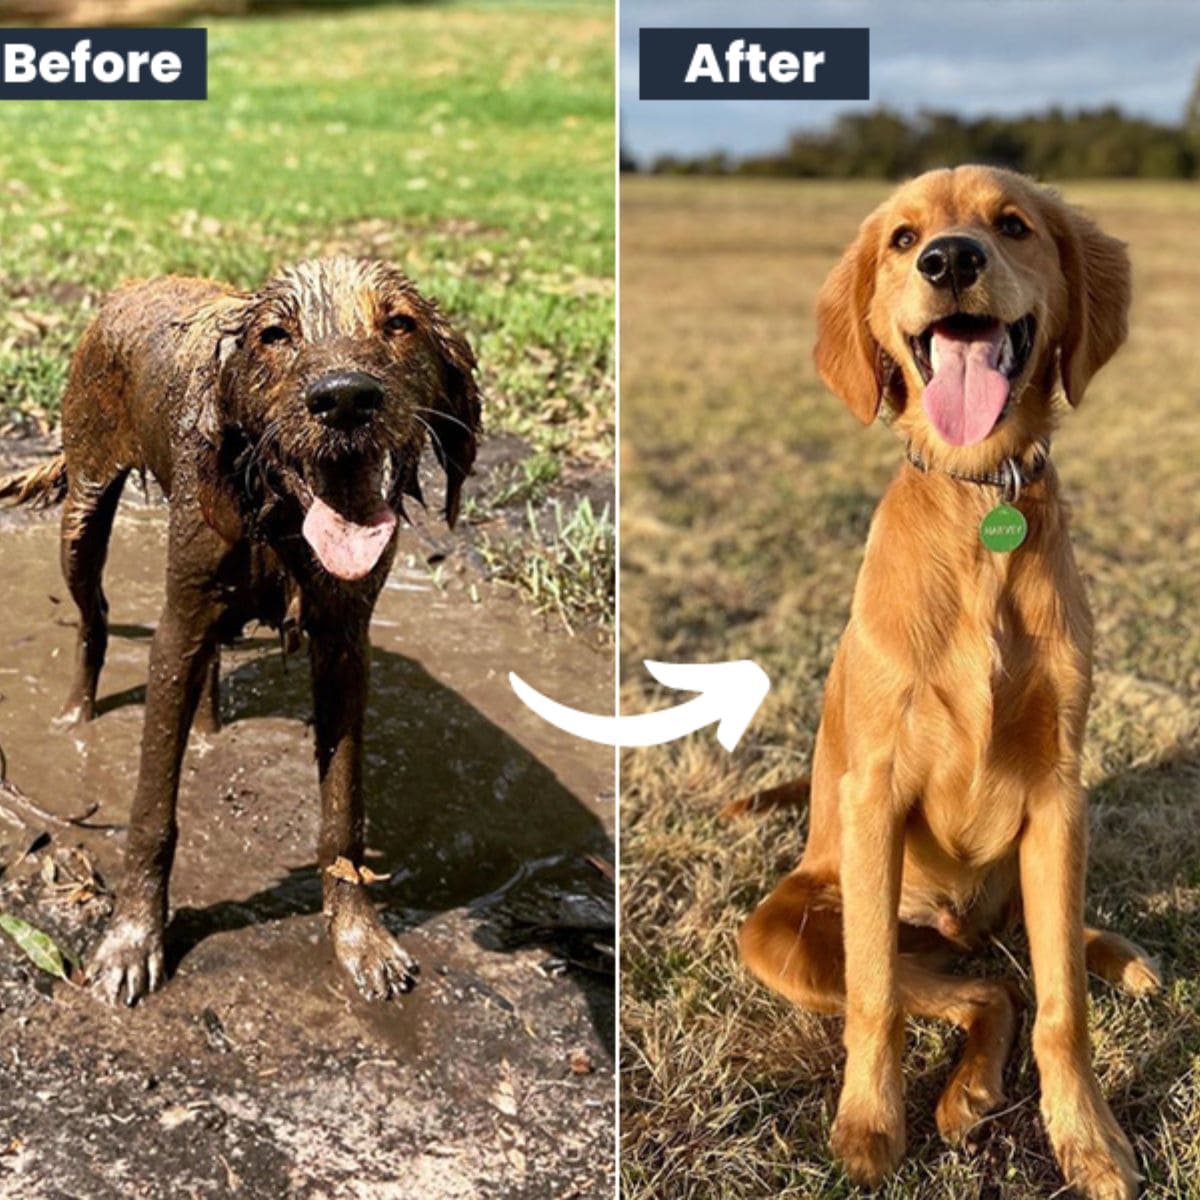 A dog before and after bathing with Doggo jet